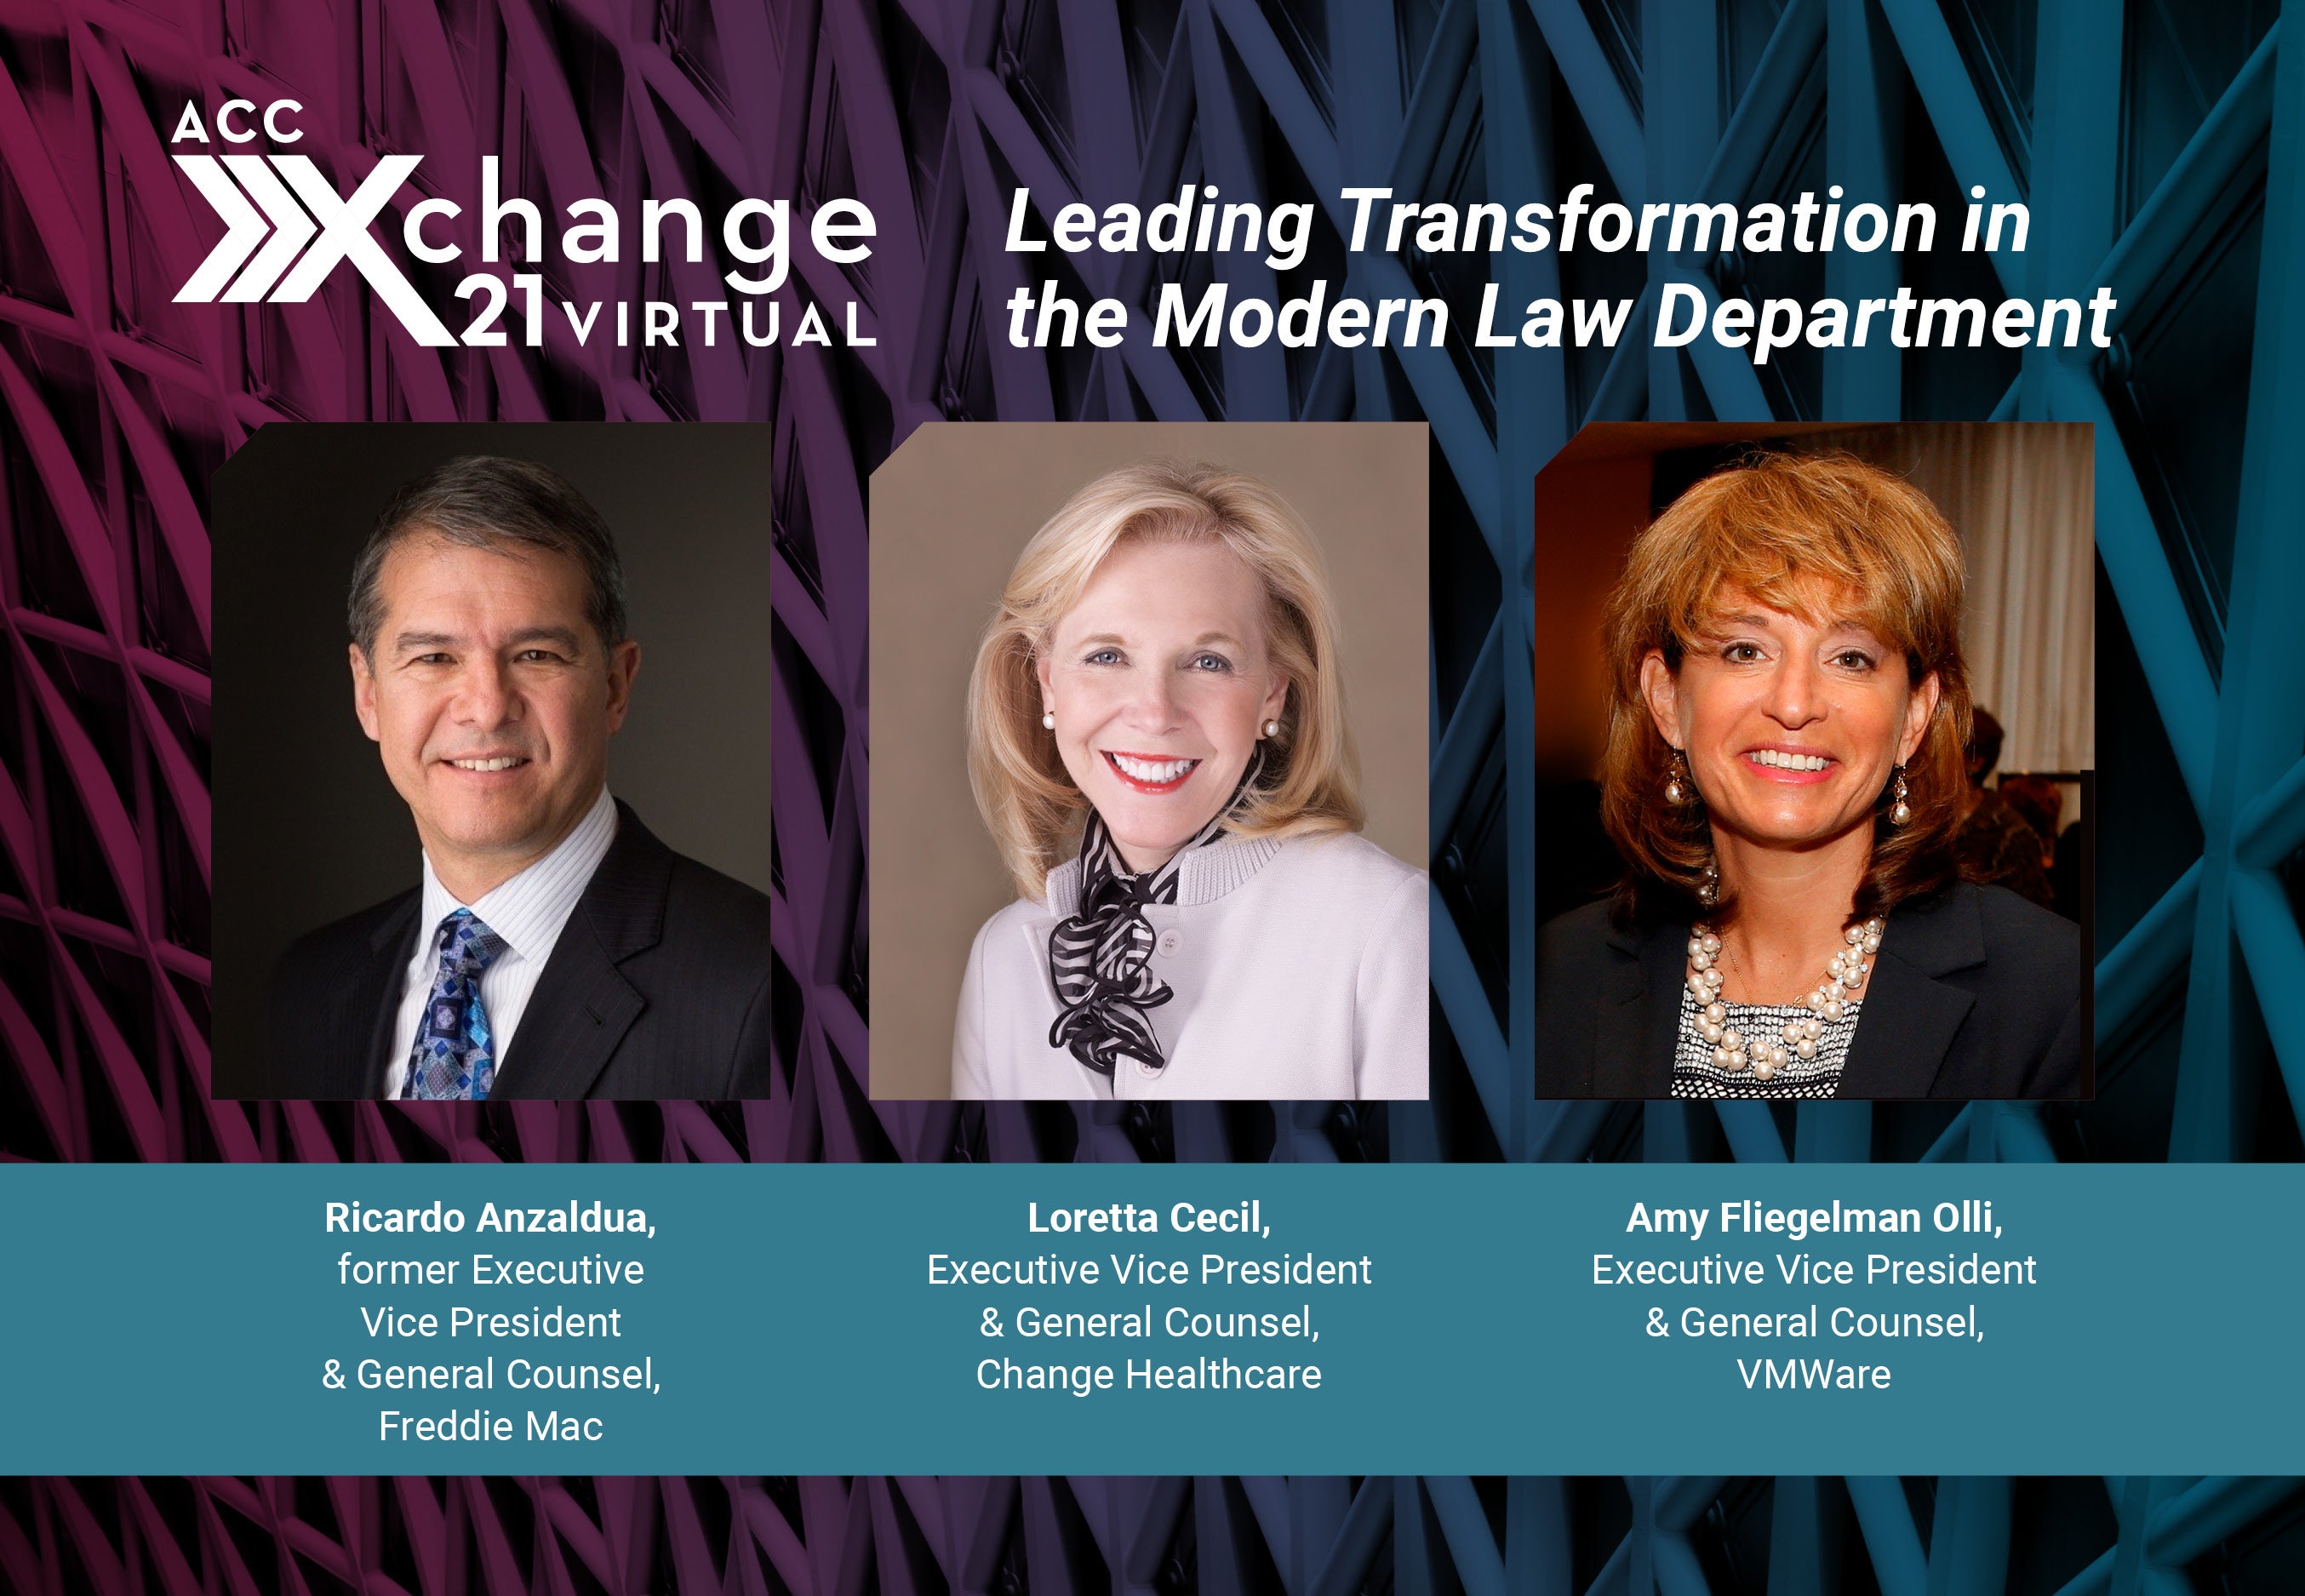 ACC Xchange 21 Virtual. Leading Transformation in the Modern Law Department. Ricardo Anzaldua, former Executive Vice President & General Counsel, Freddie Mac. Loretta Cecil, Executive Vice President & General Counsel, Change Healthcare. Amy Fliegelman Olli, Executive Vice President & General Counsel, VMWare. Developed in partnership with ACC's Law Department Management Network and Legal Operations Section.